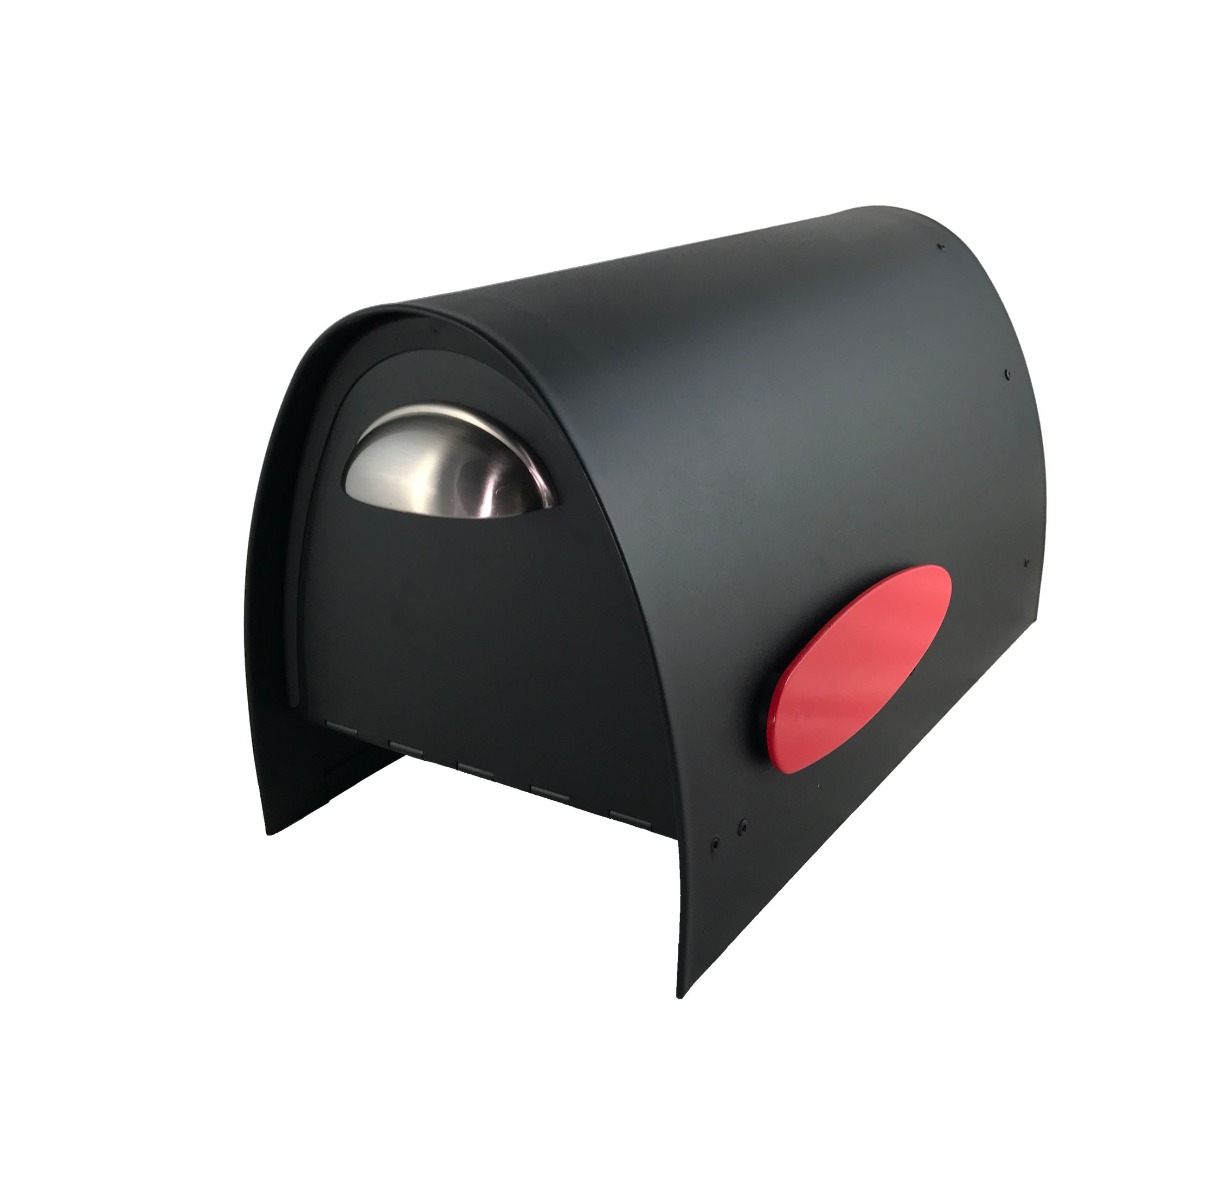 Spira Postbox Unique Post Mount Mailbox without Newspaper Holder - Black